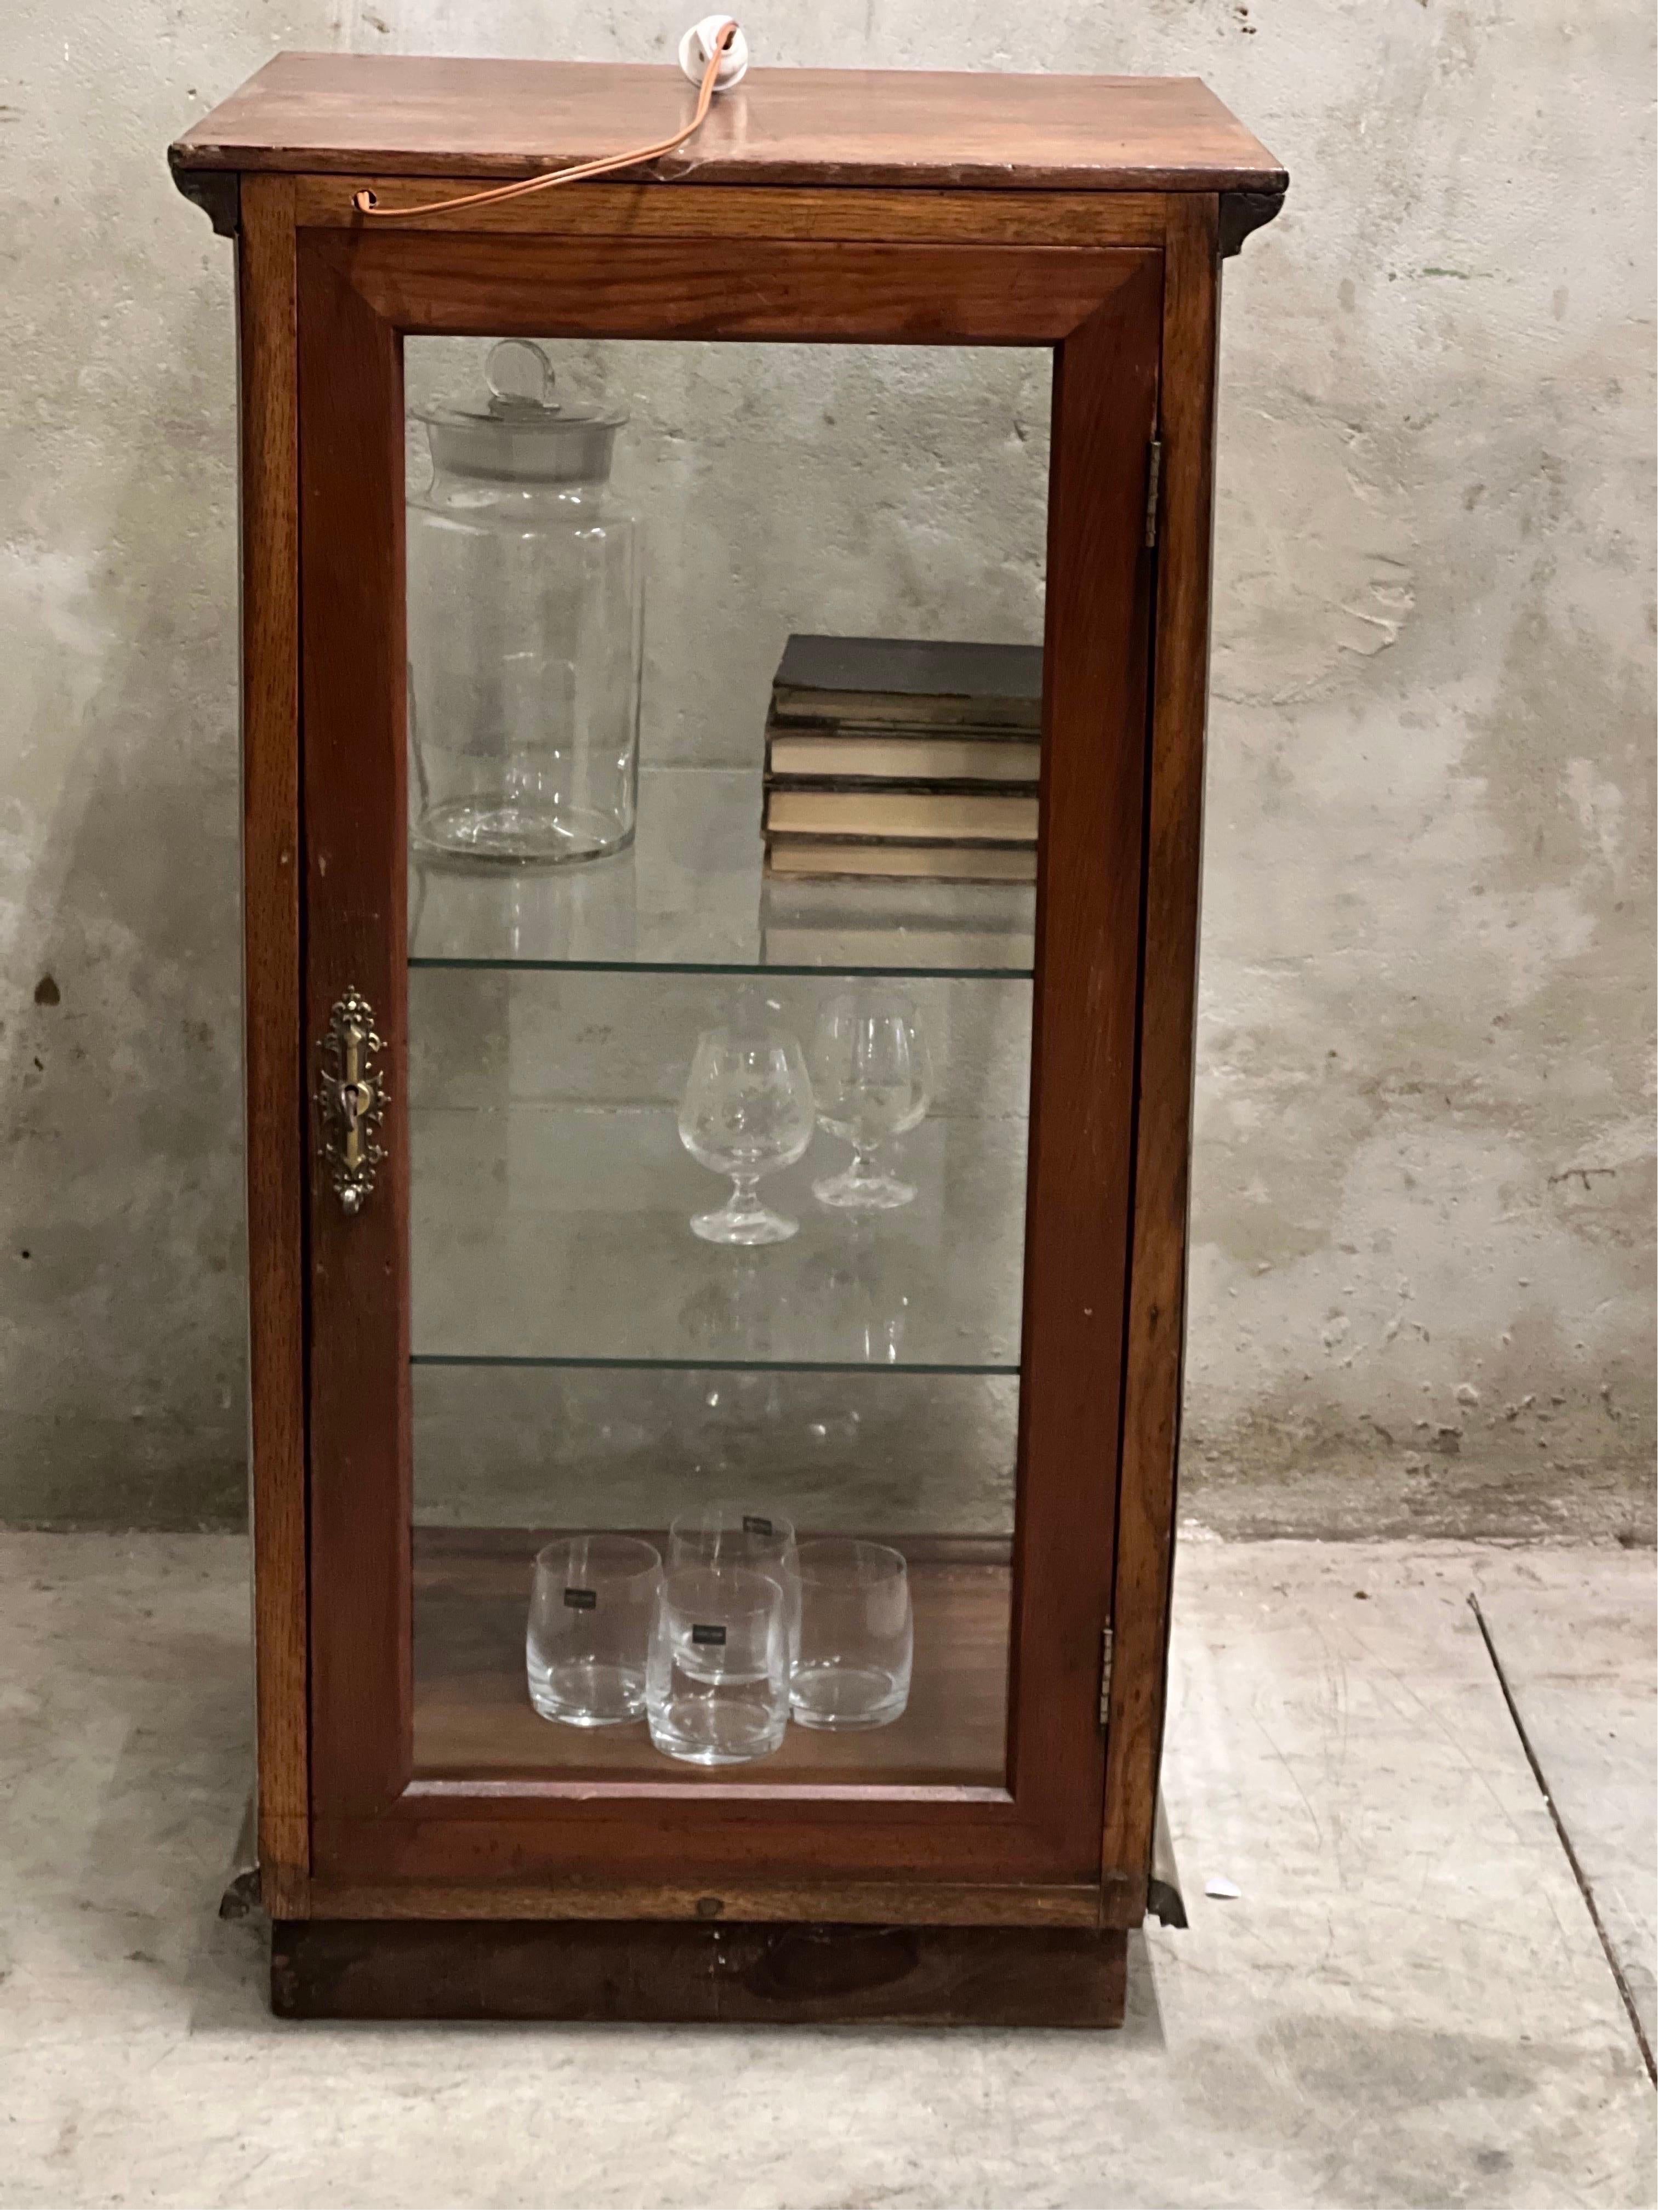 Very rare antique counter display case made by A Vorndran from Frankfurt Am Main around 1900. Superb craftsmanship with nickel-plated metal on wood. Front emblem in brass and 2 thick glass shelves with some chips but still fine.

The old glass at